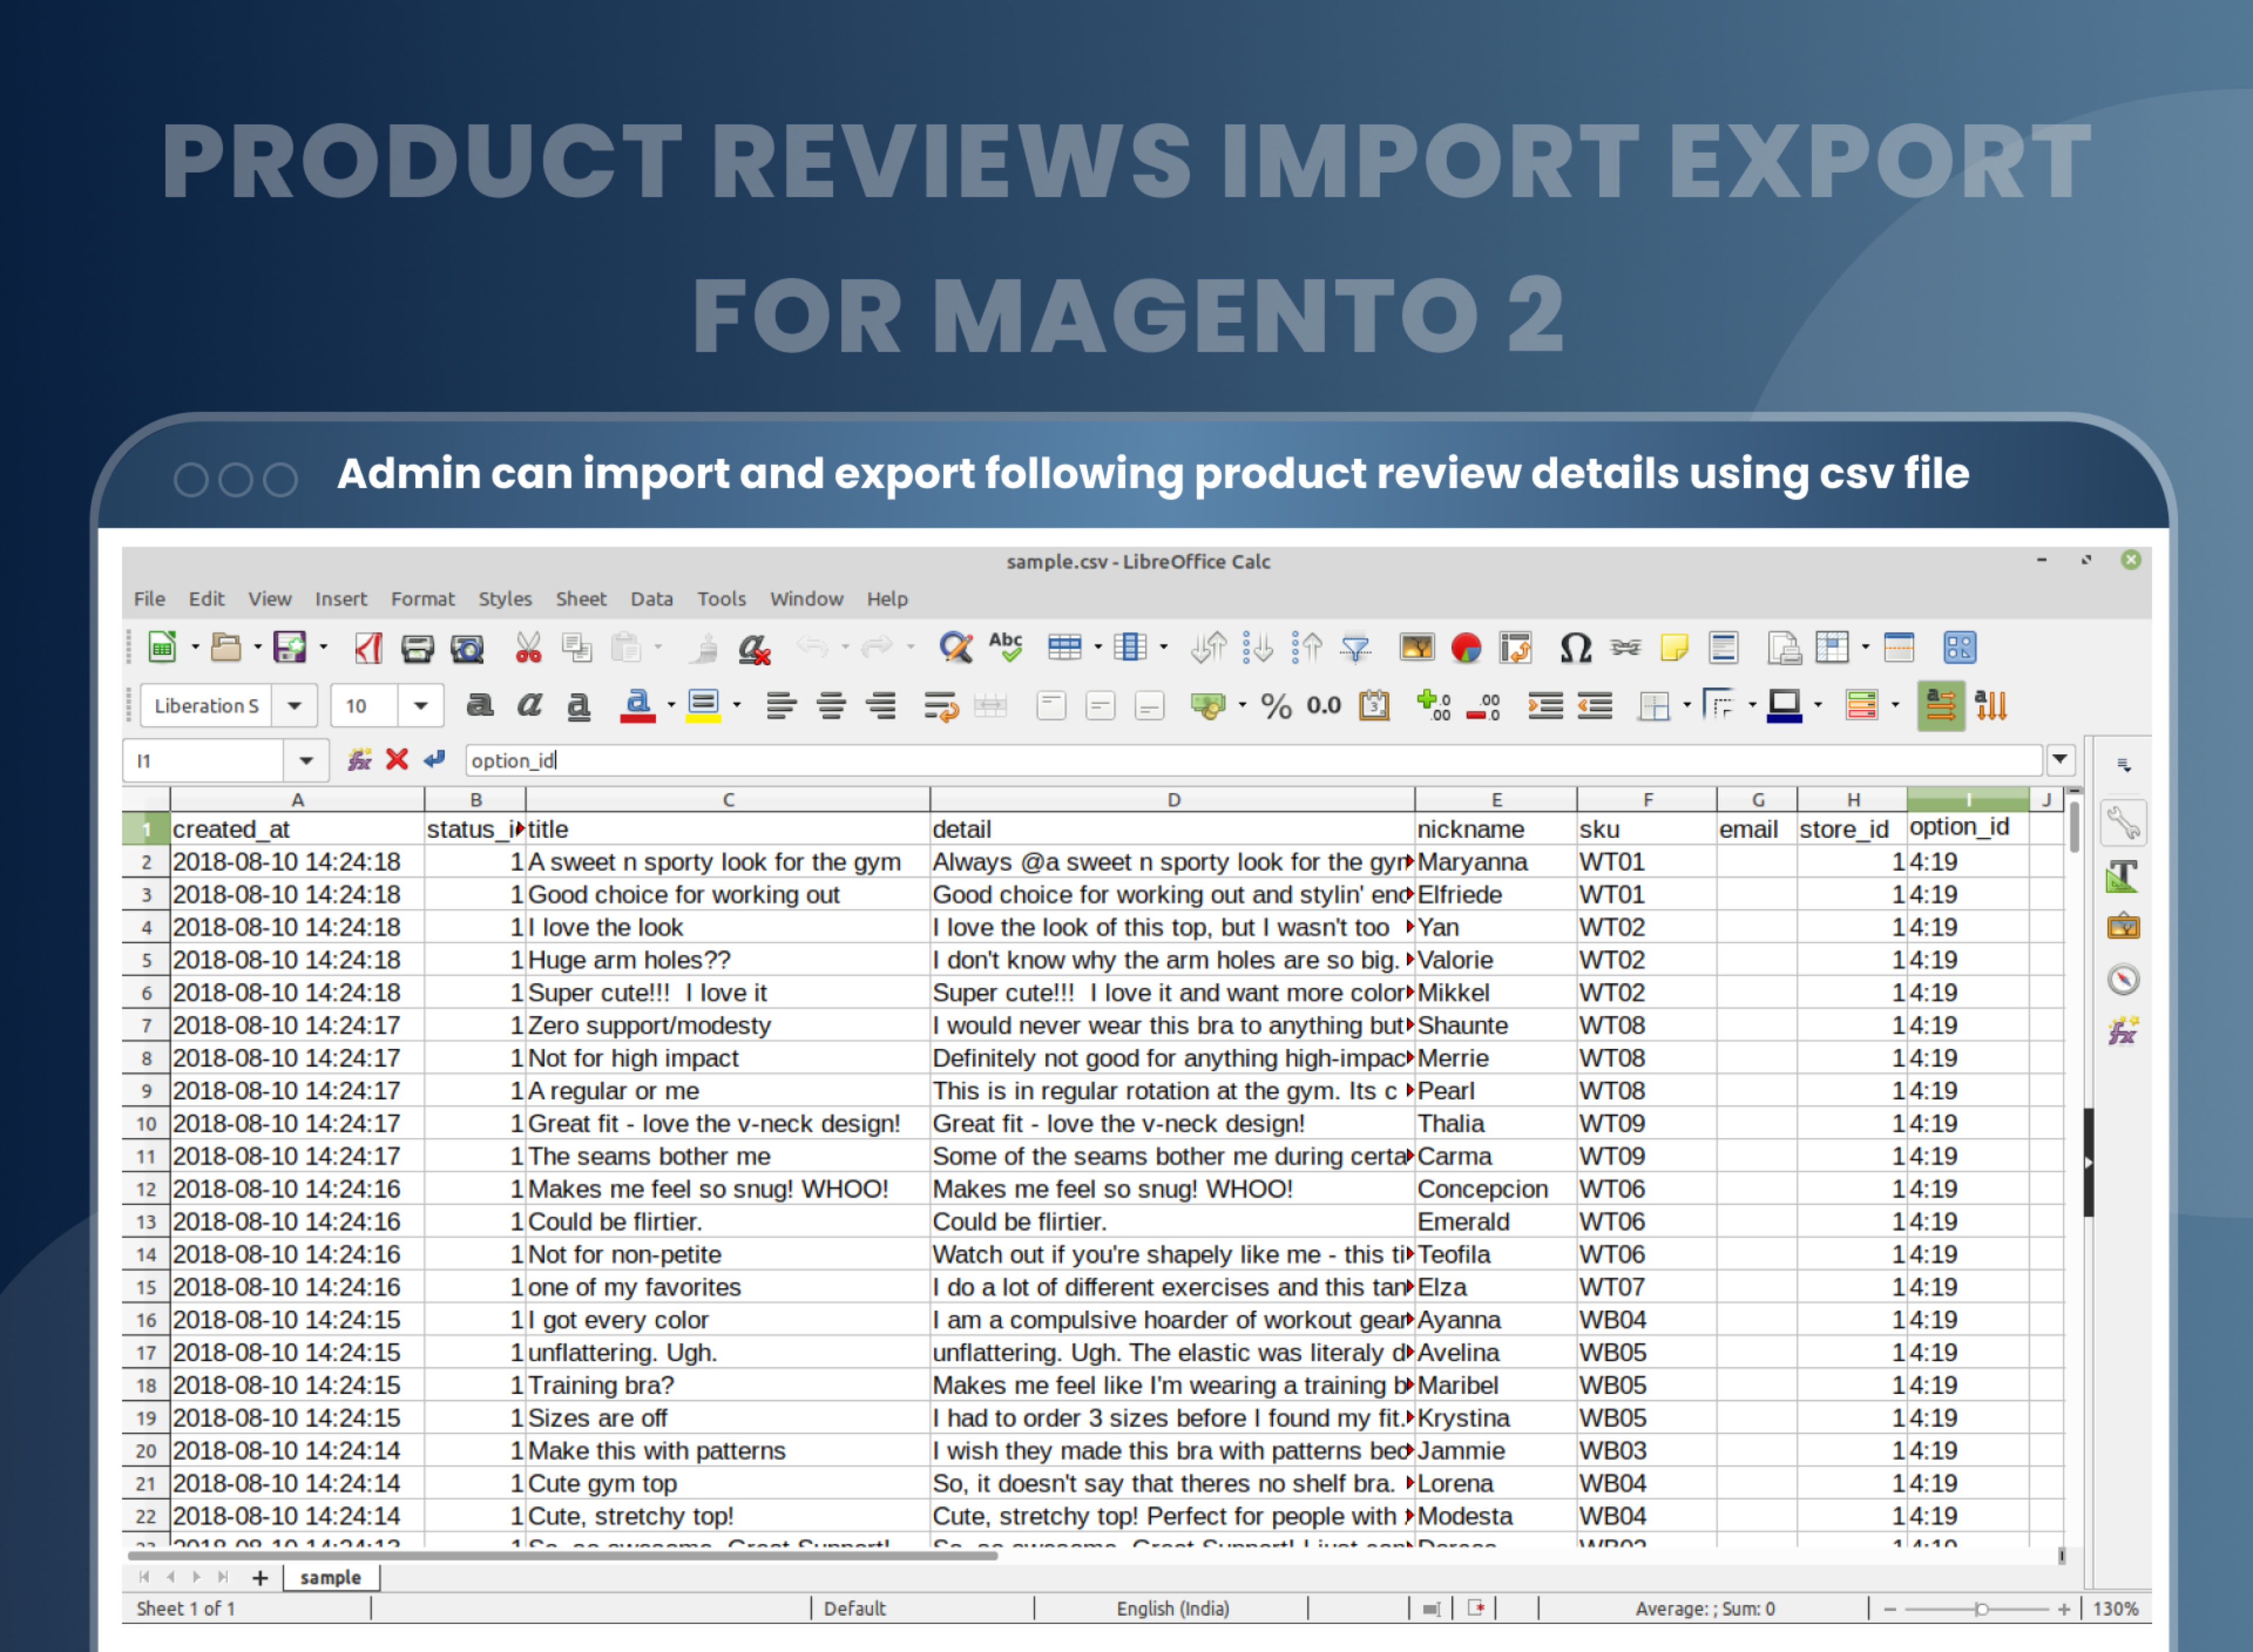 Admin can import and export following product review details using csv file